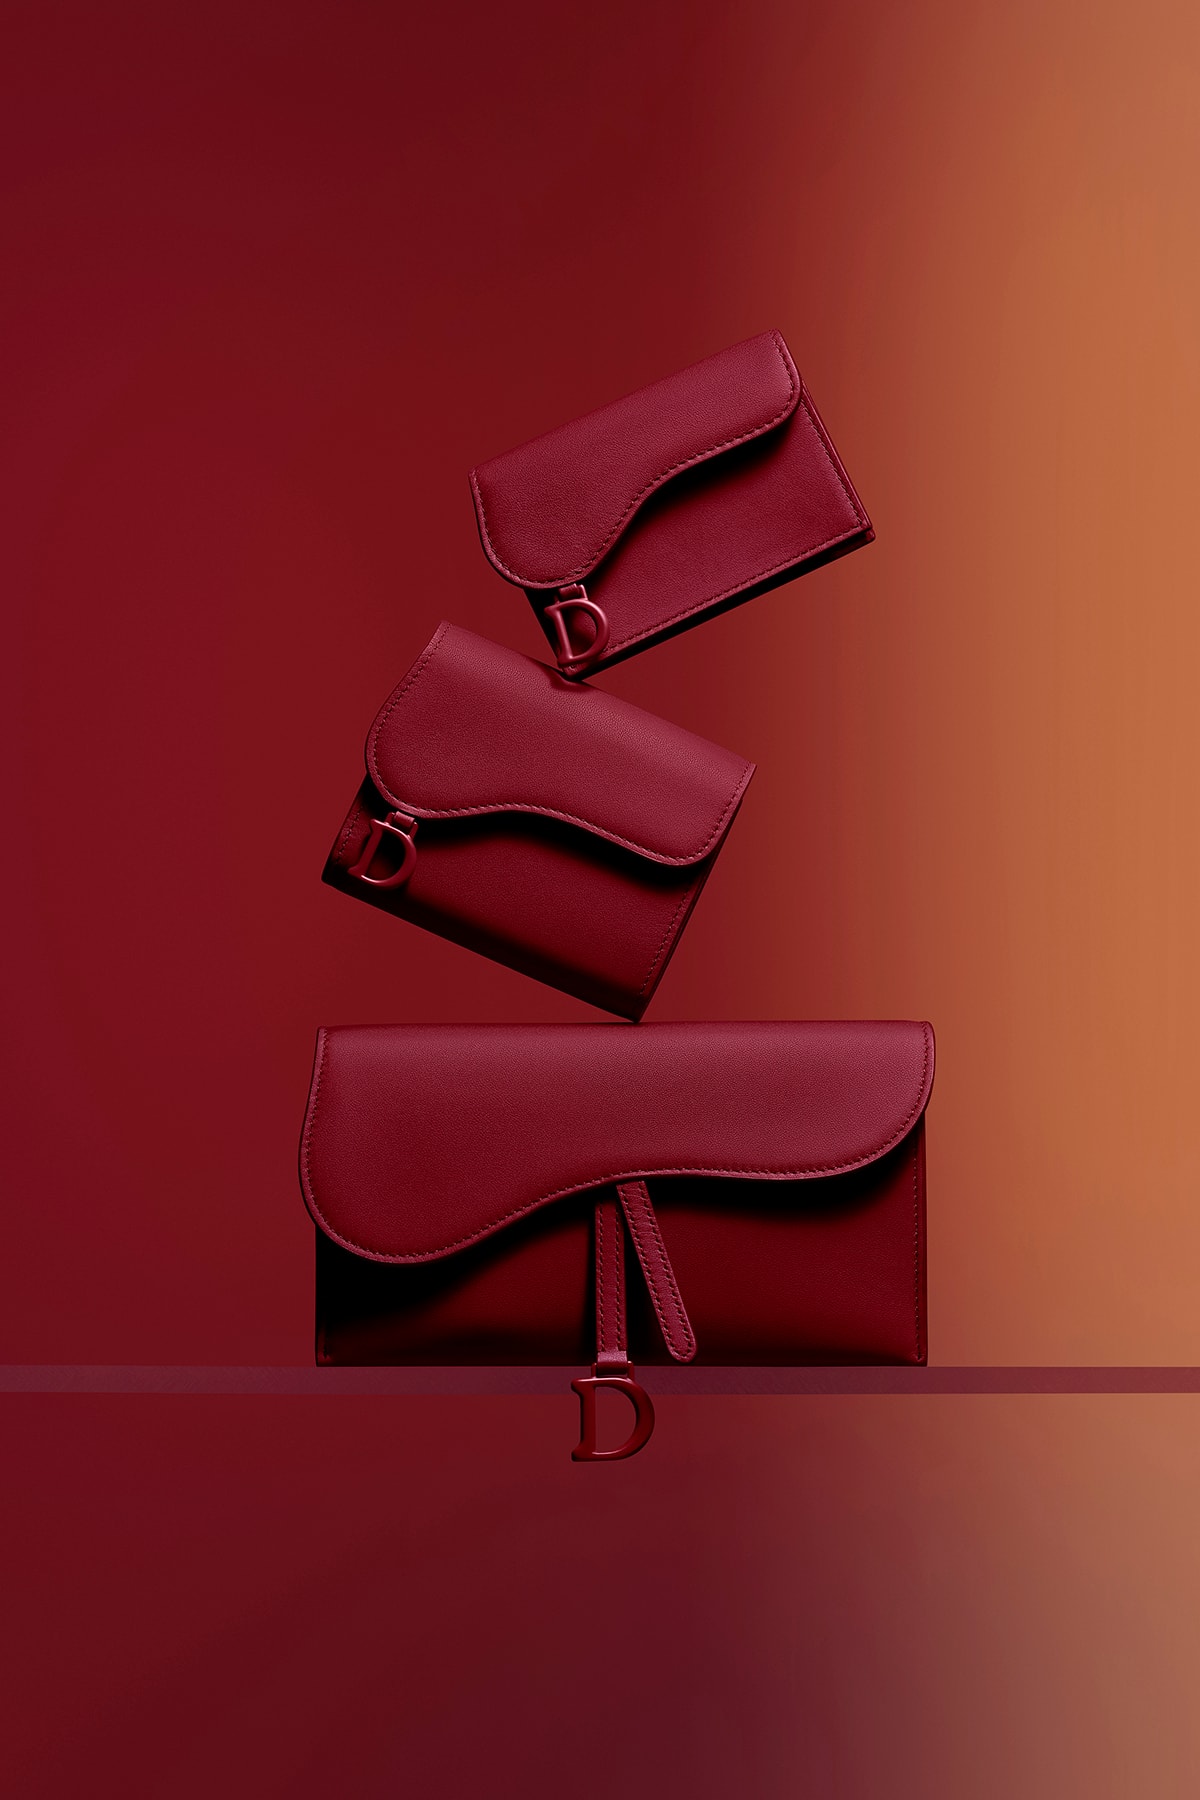 Dior Ultra-Matte Collection Bags Saddle Wallet Red